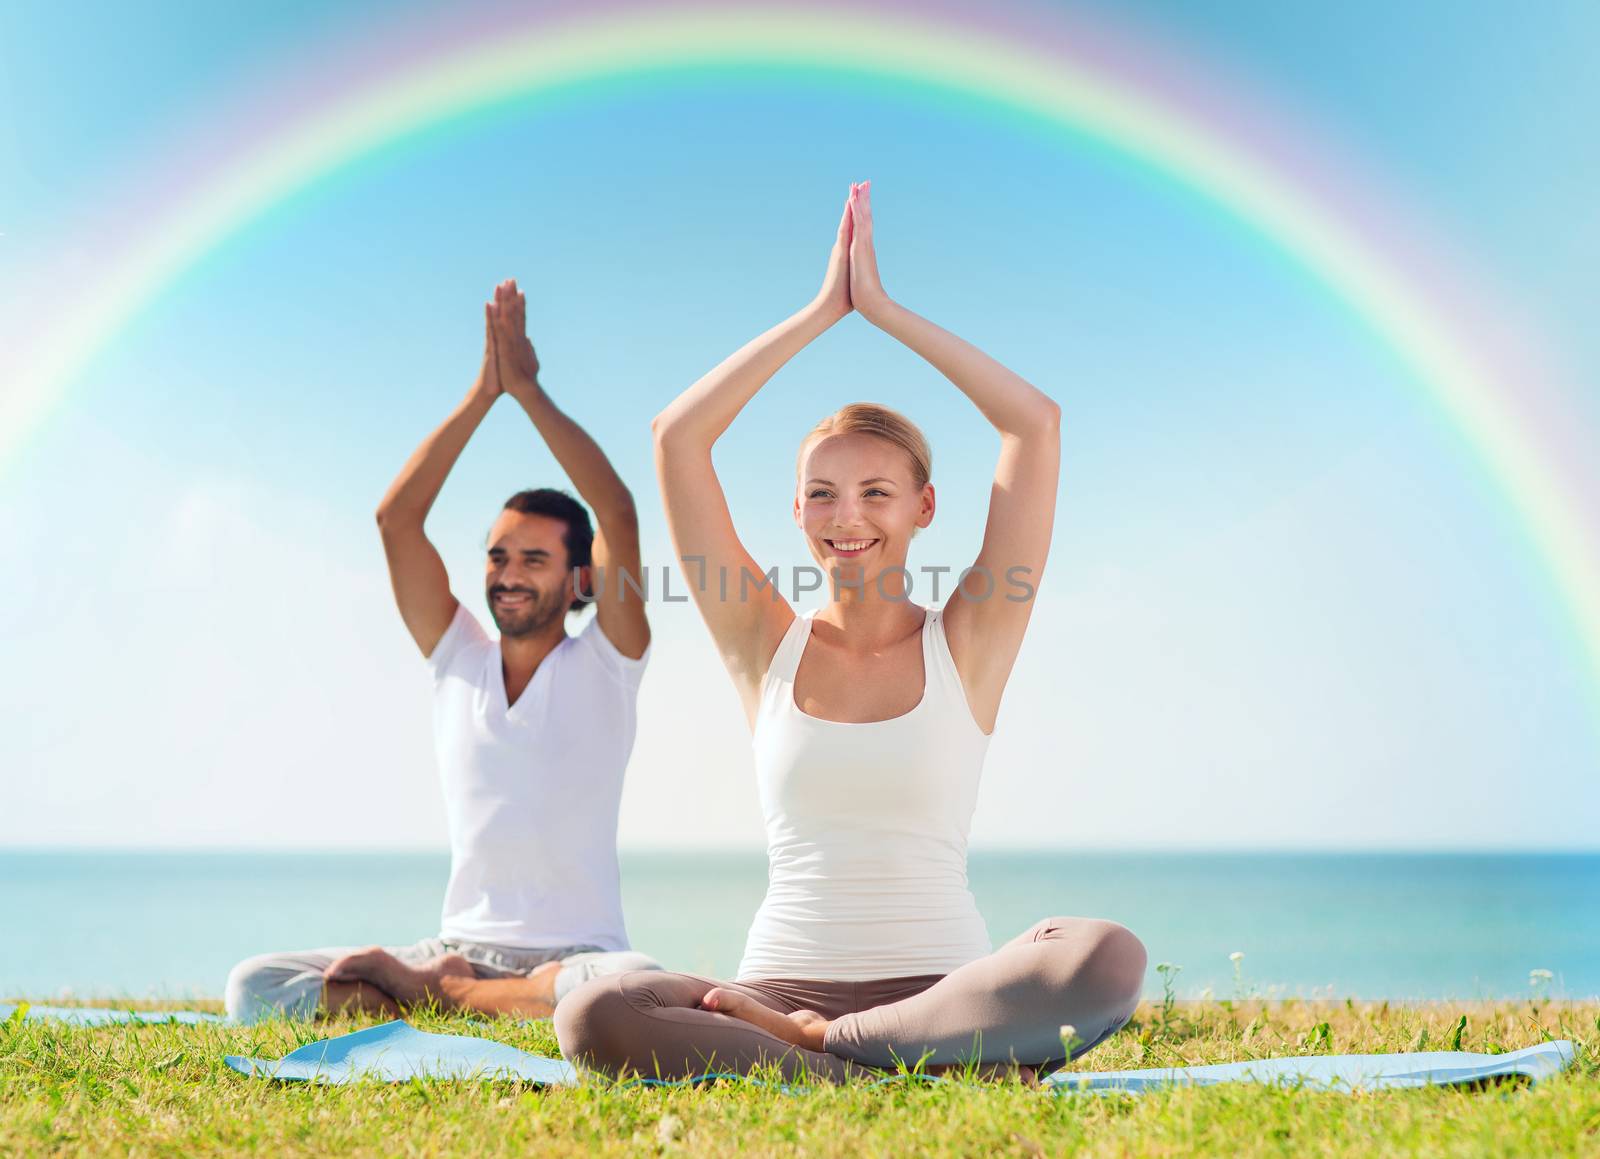 sport, fitness, yoga and people concept - smiling couple meditating and sitting on mats with raised hands over sea and rainbow in blue sky background